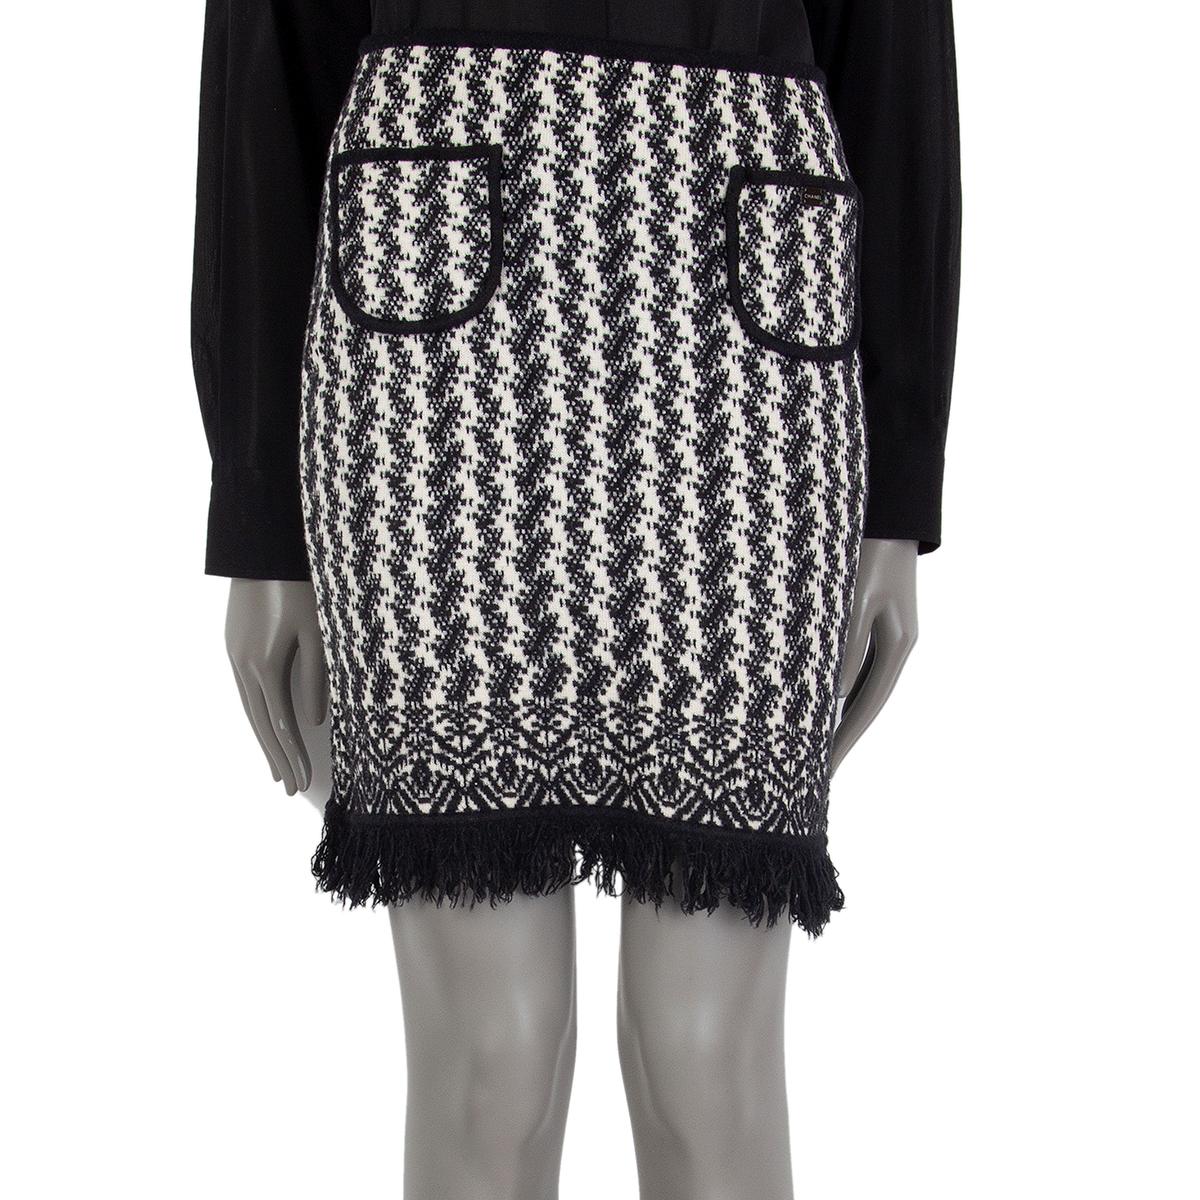 Chanel fringe-hem knit skirt in black and off-white wool (60%) polyamide (40%) with two pockets in the front, close and straight fit to slip on. Unlined. Has been worn and is in excellent condition.

Tag Size 36
Size XS
Waist 34cm (13.3in)
Hips 42cm